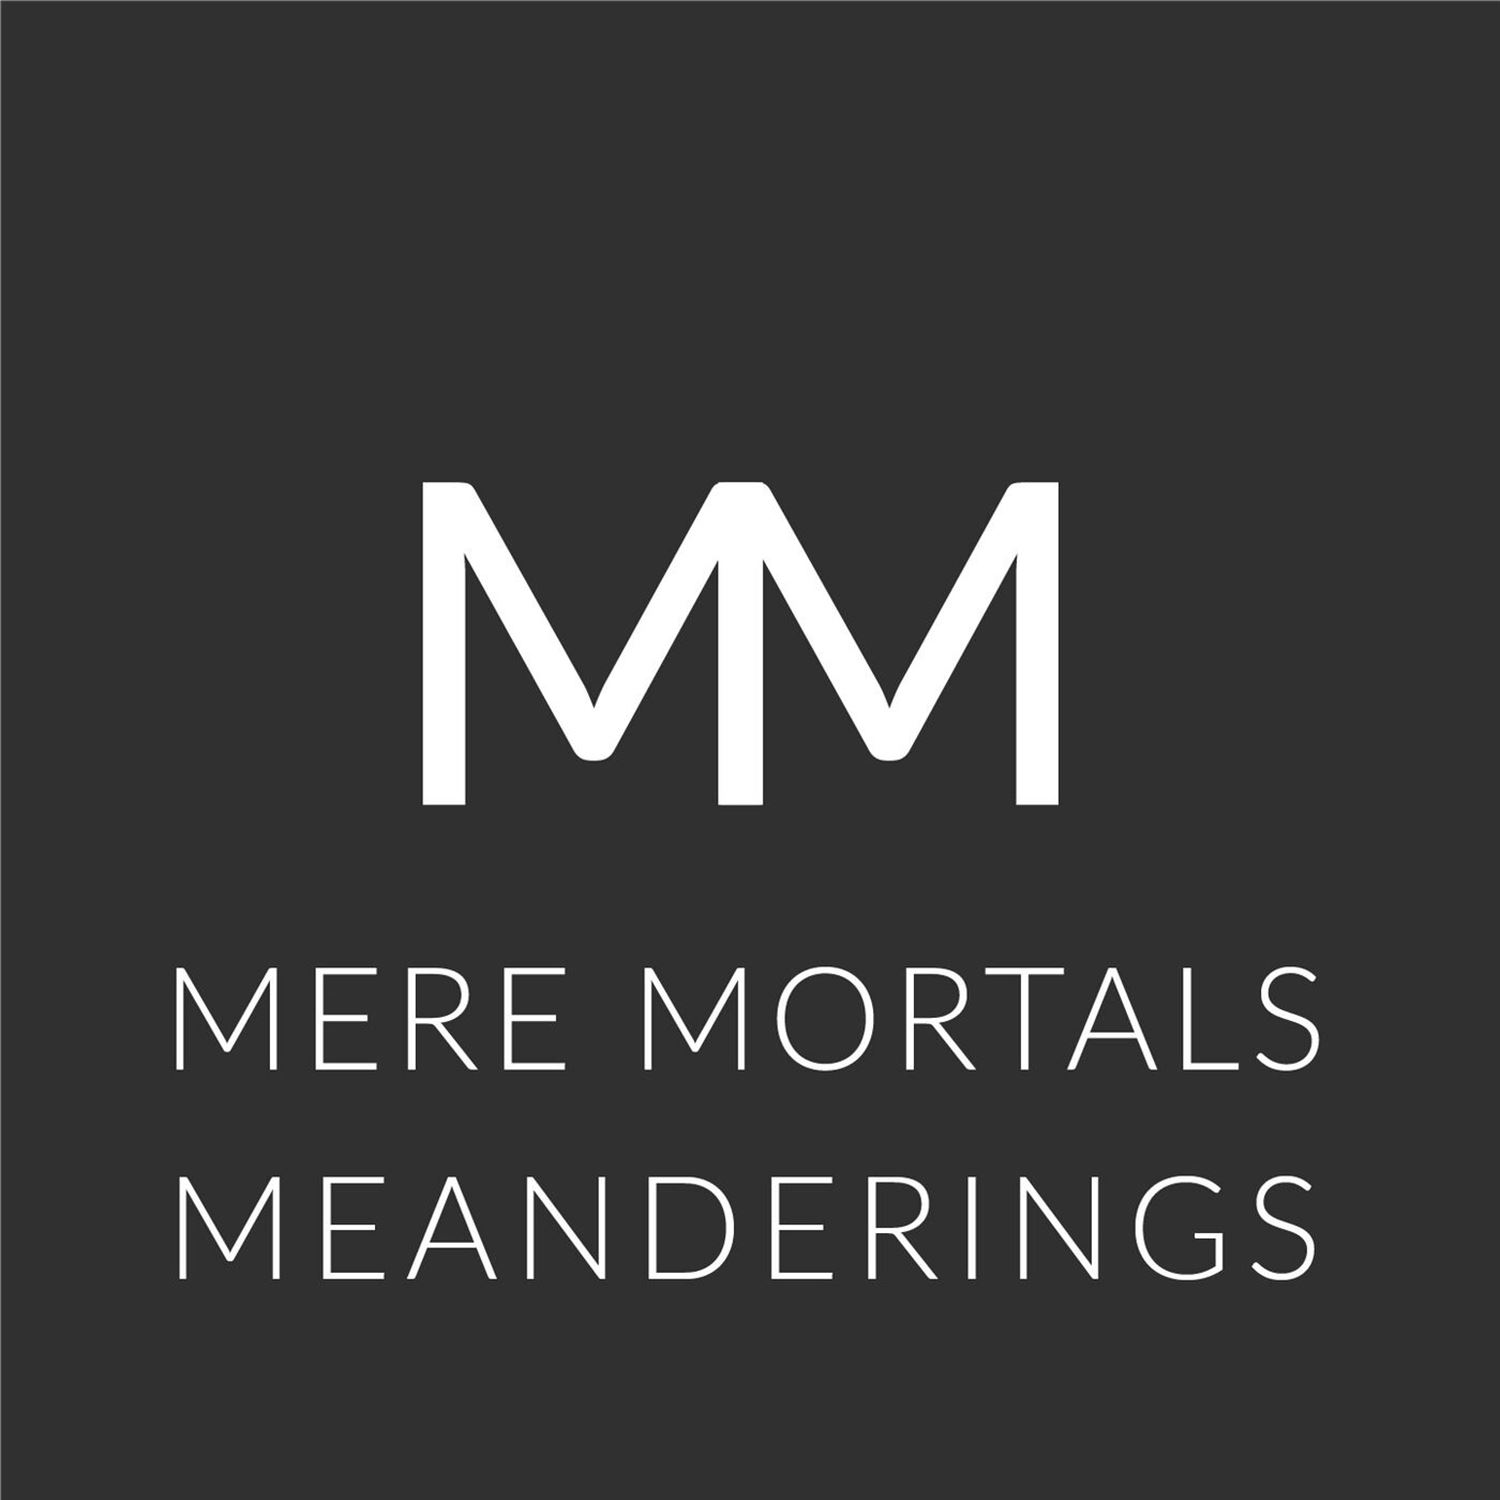 Proud Of Being A Mere Mortalite (Mere Mortals Episode #79 - Meanderings)